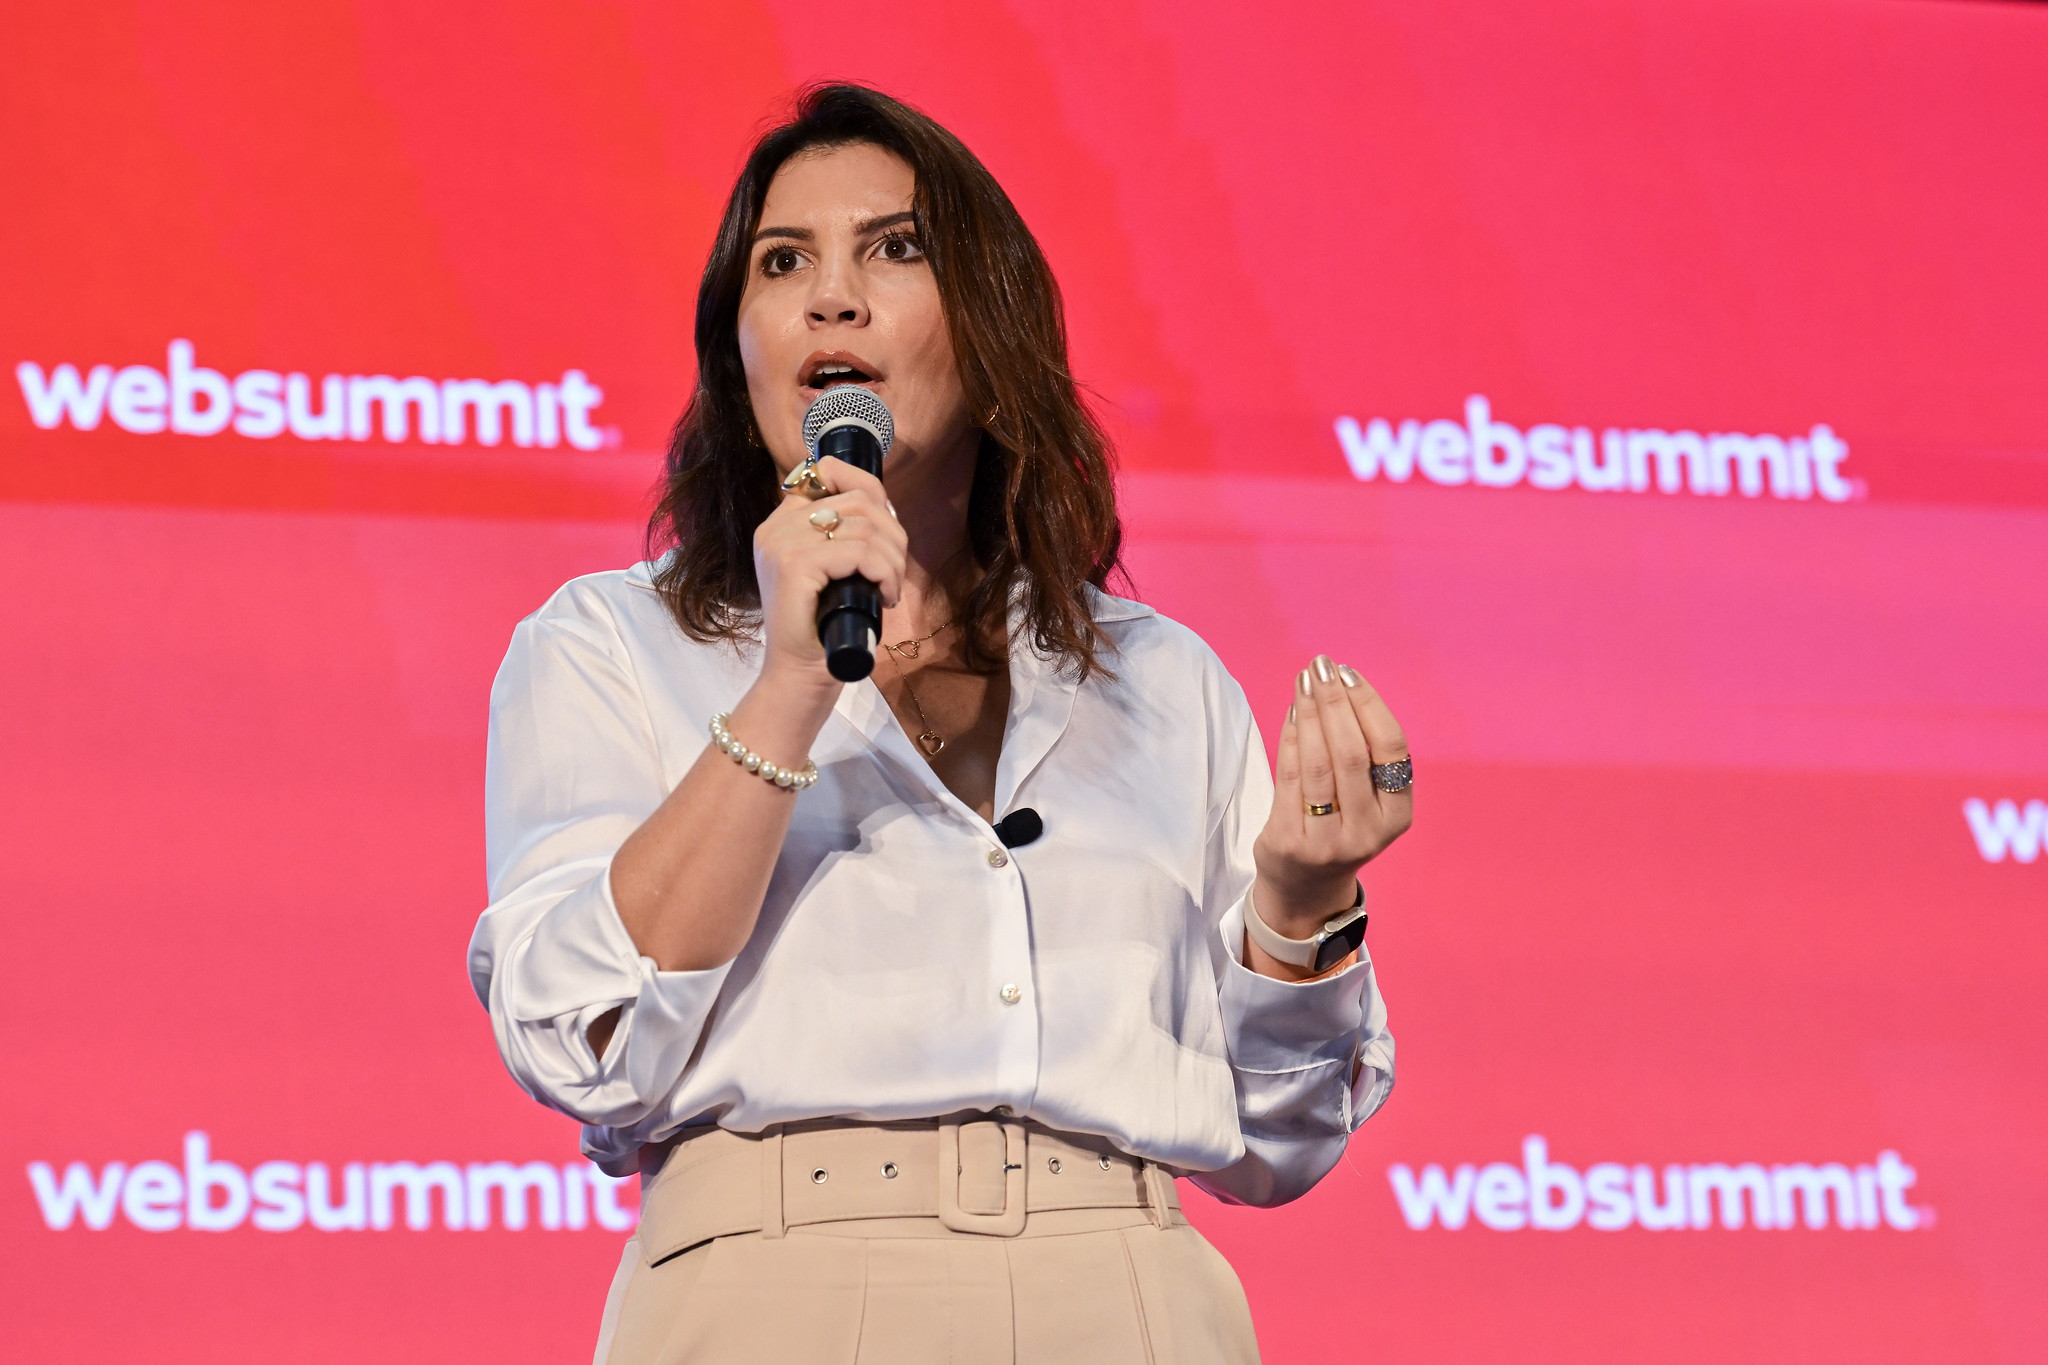 A photo of a person, Maria Luisa Fontes, CEO of Fusion Clinic, speaking onstage at Web Summit 2023. The person is holding a microphone in their hand. They are standing against a plain coloured background with the Web Summit logo visible.